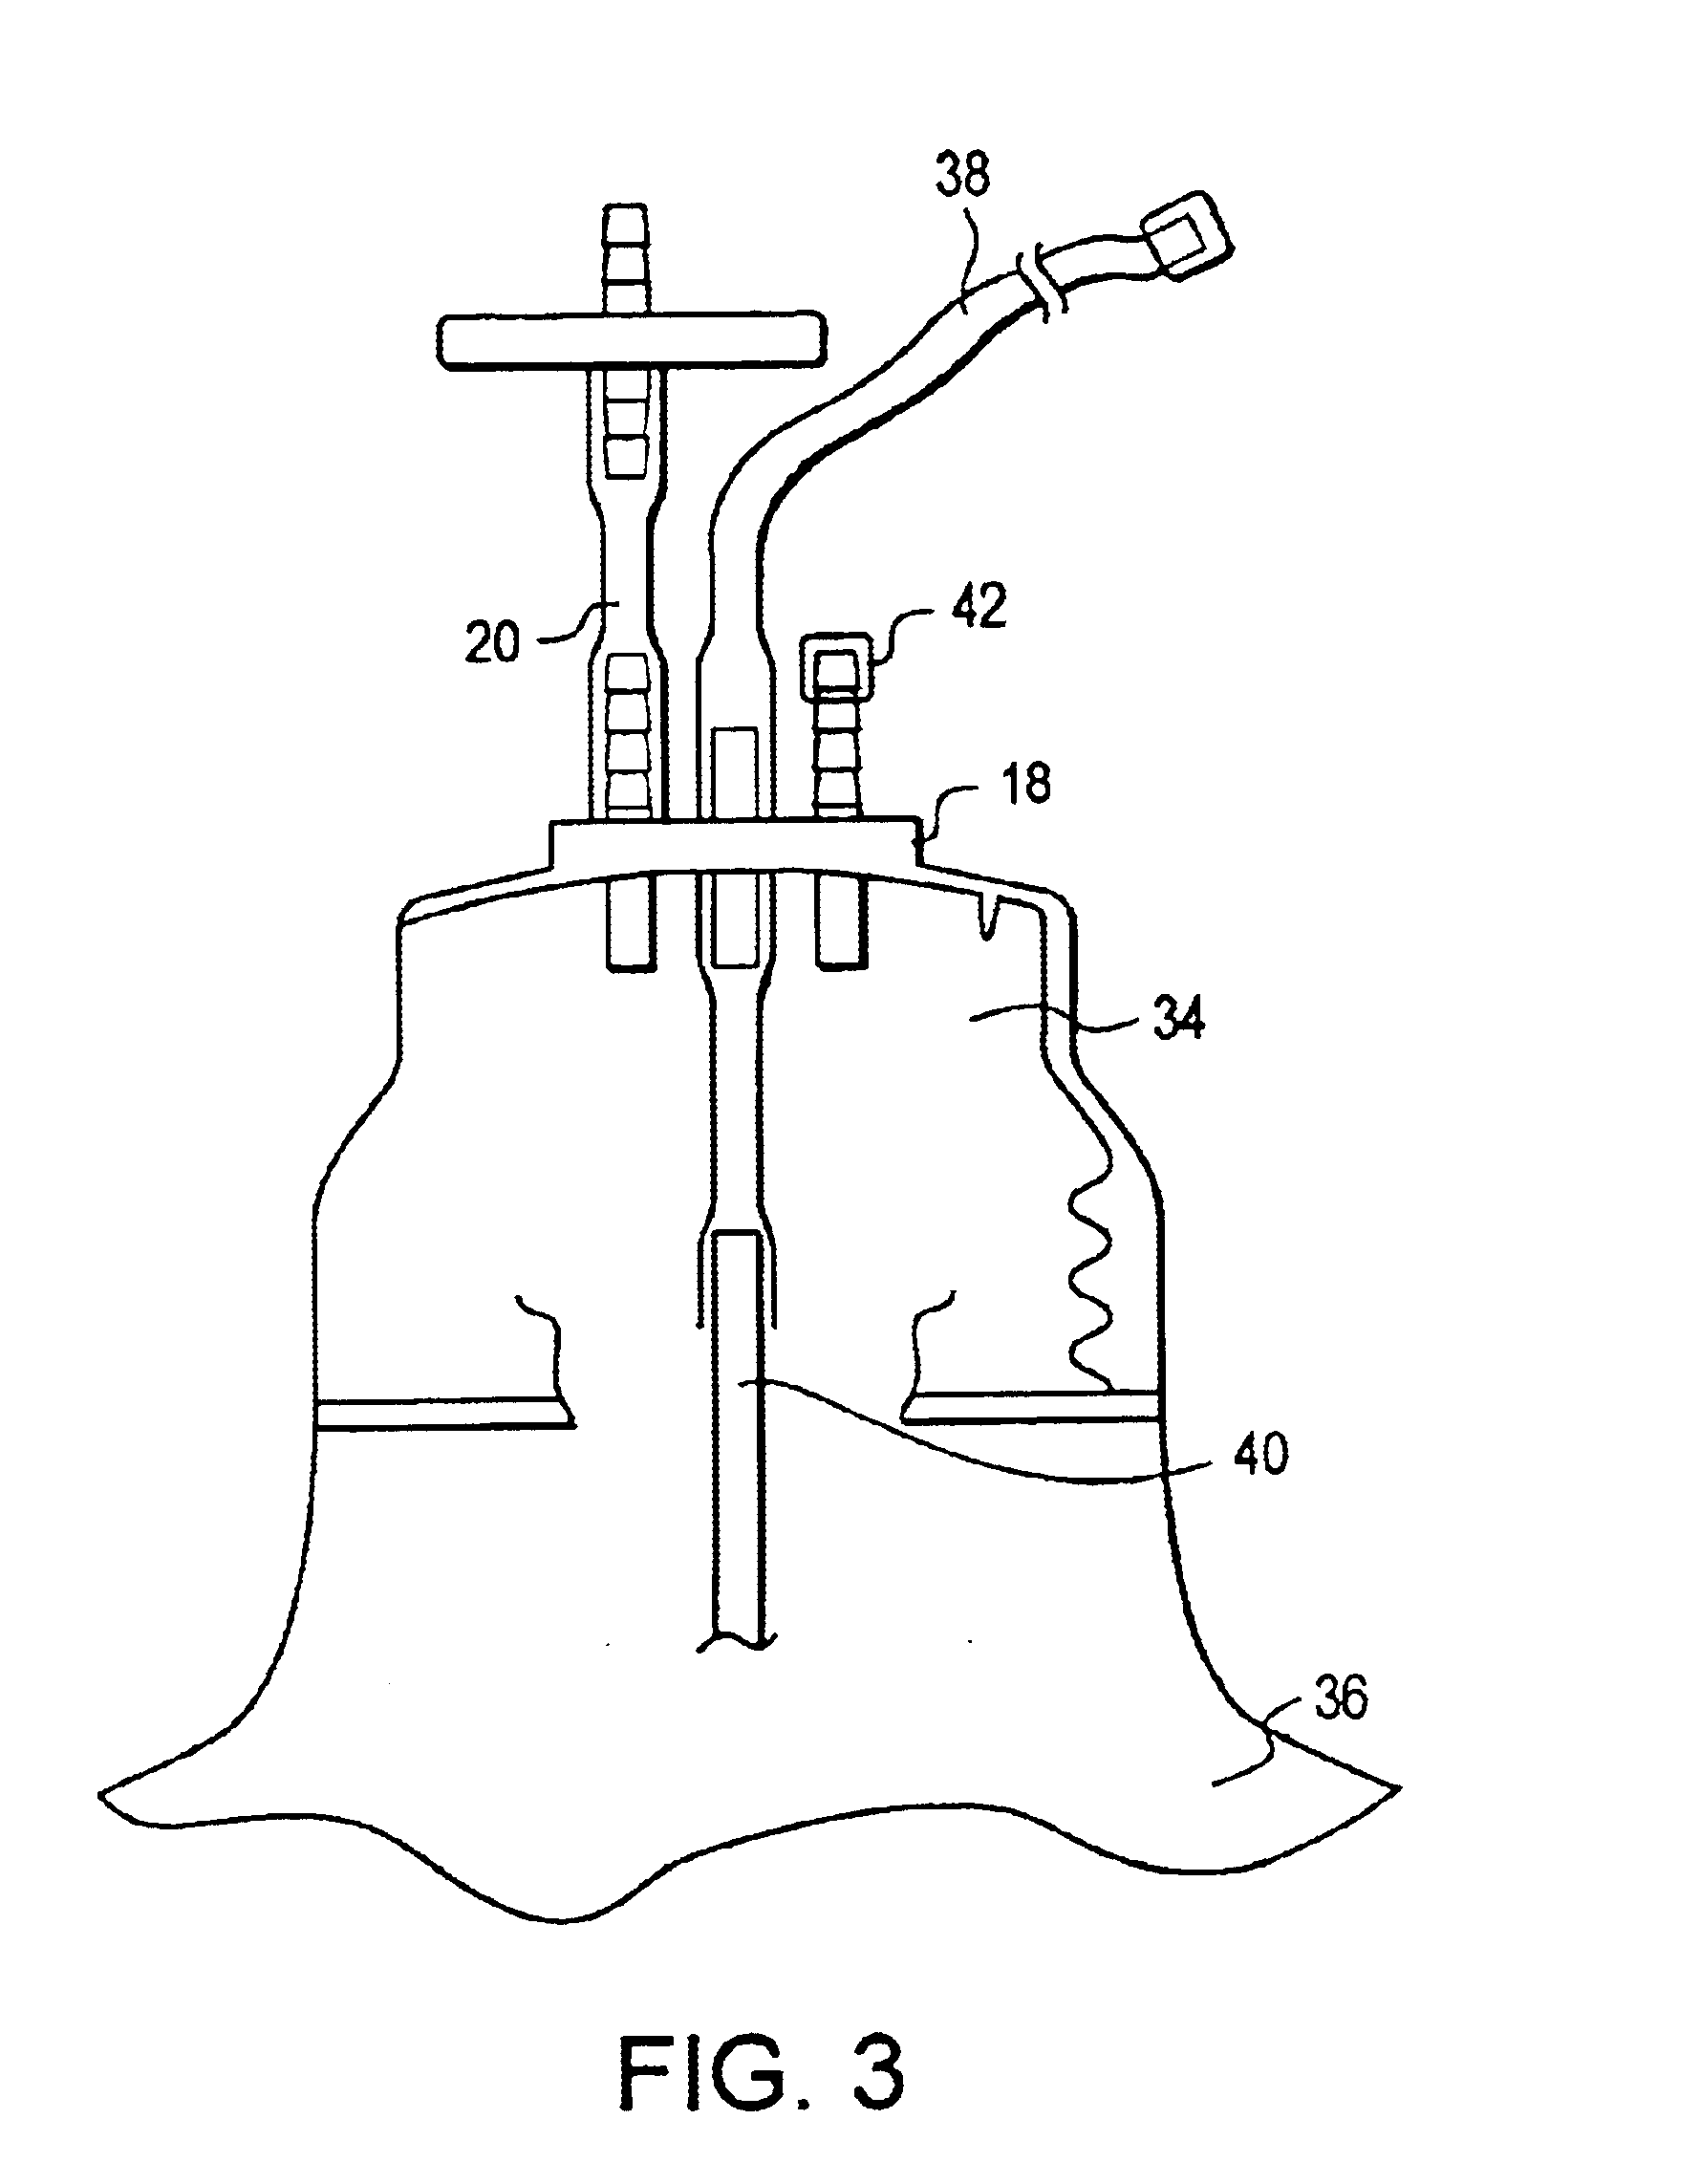 Methods of producing carbon-13 labeled biomass